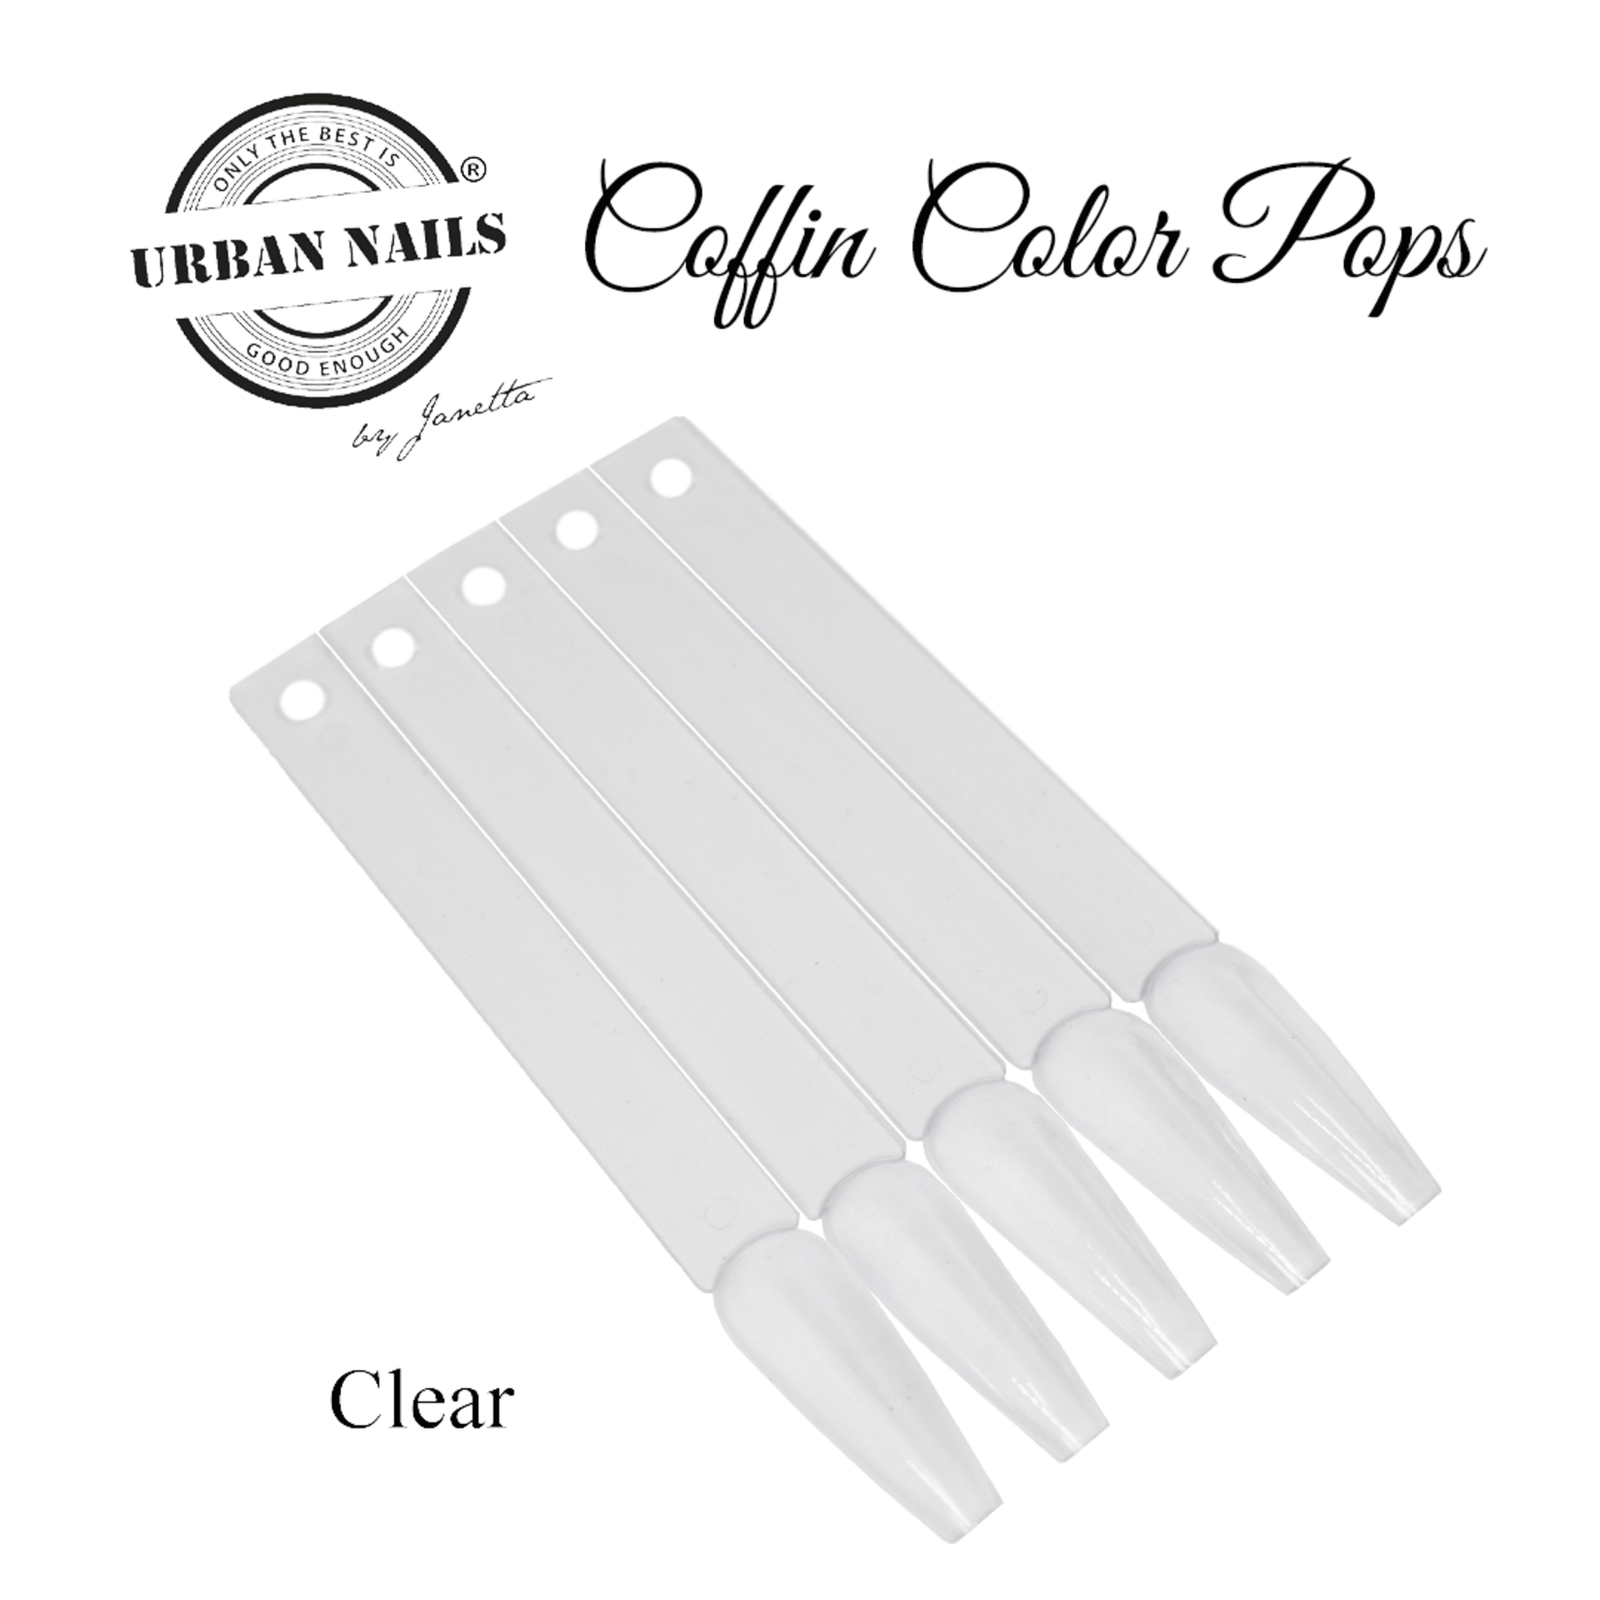 Urban nails Coffin color pops met ring clear